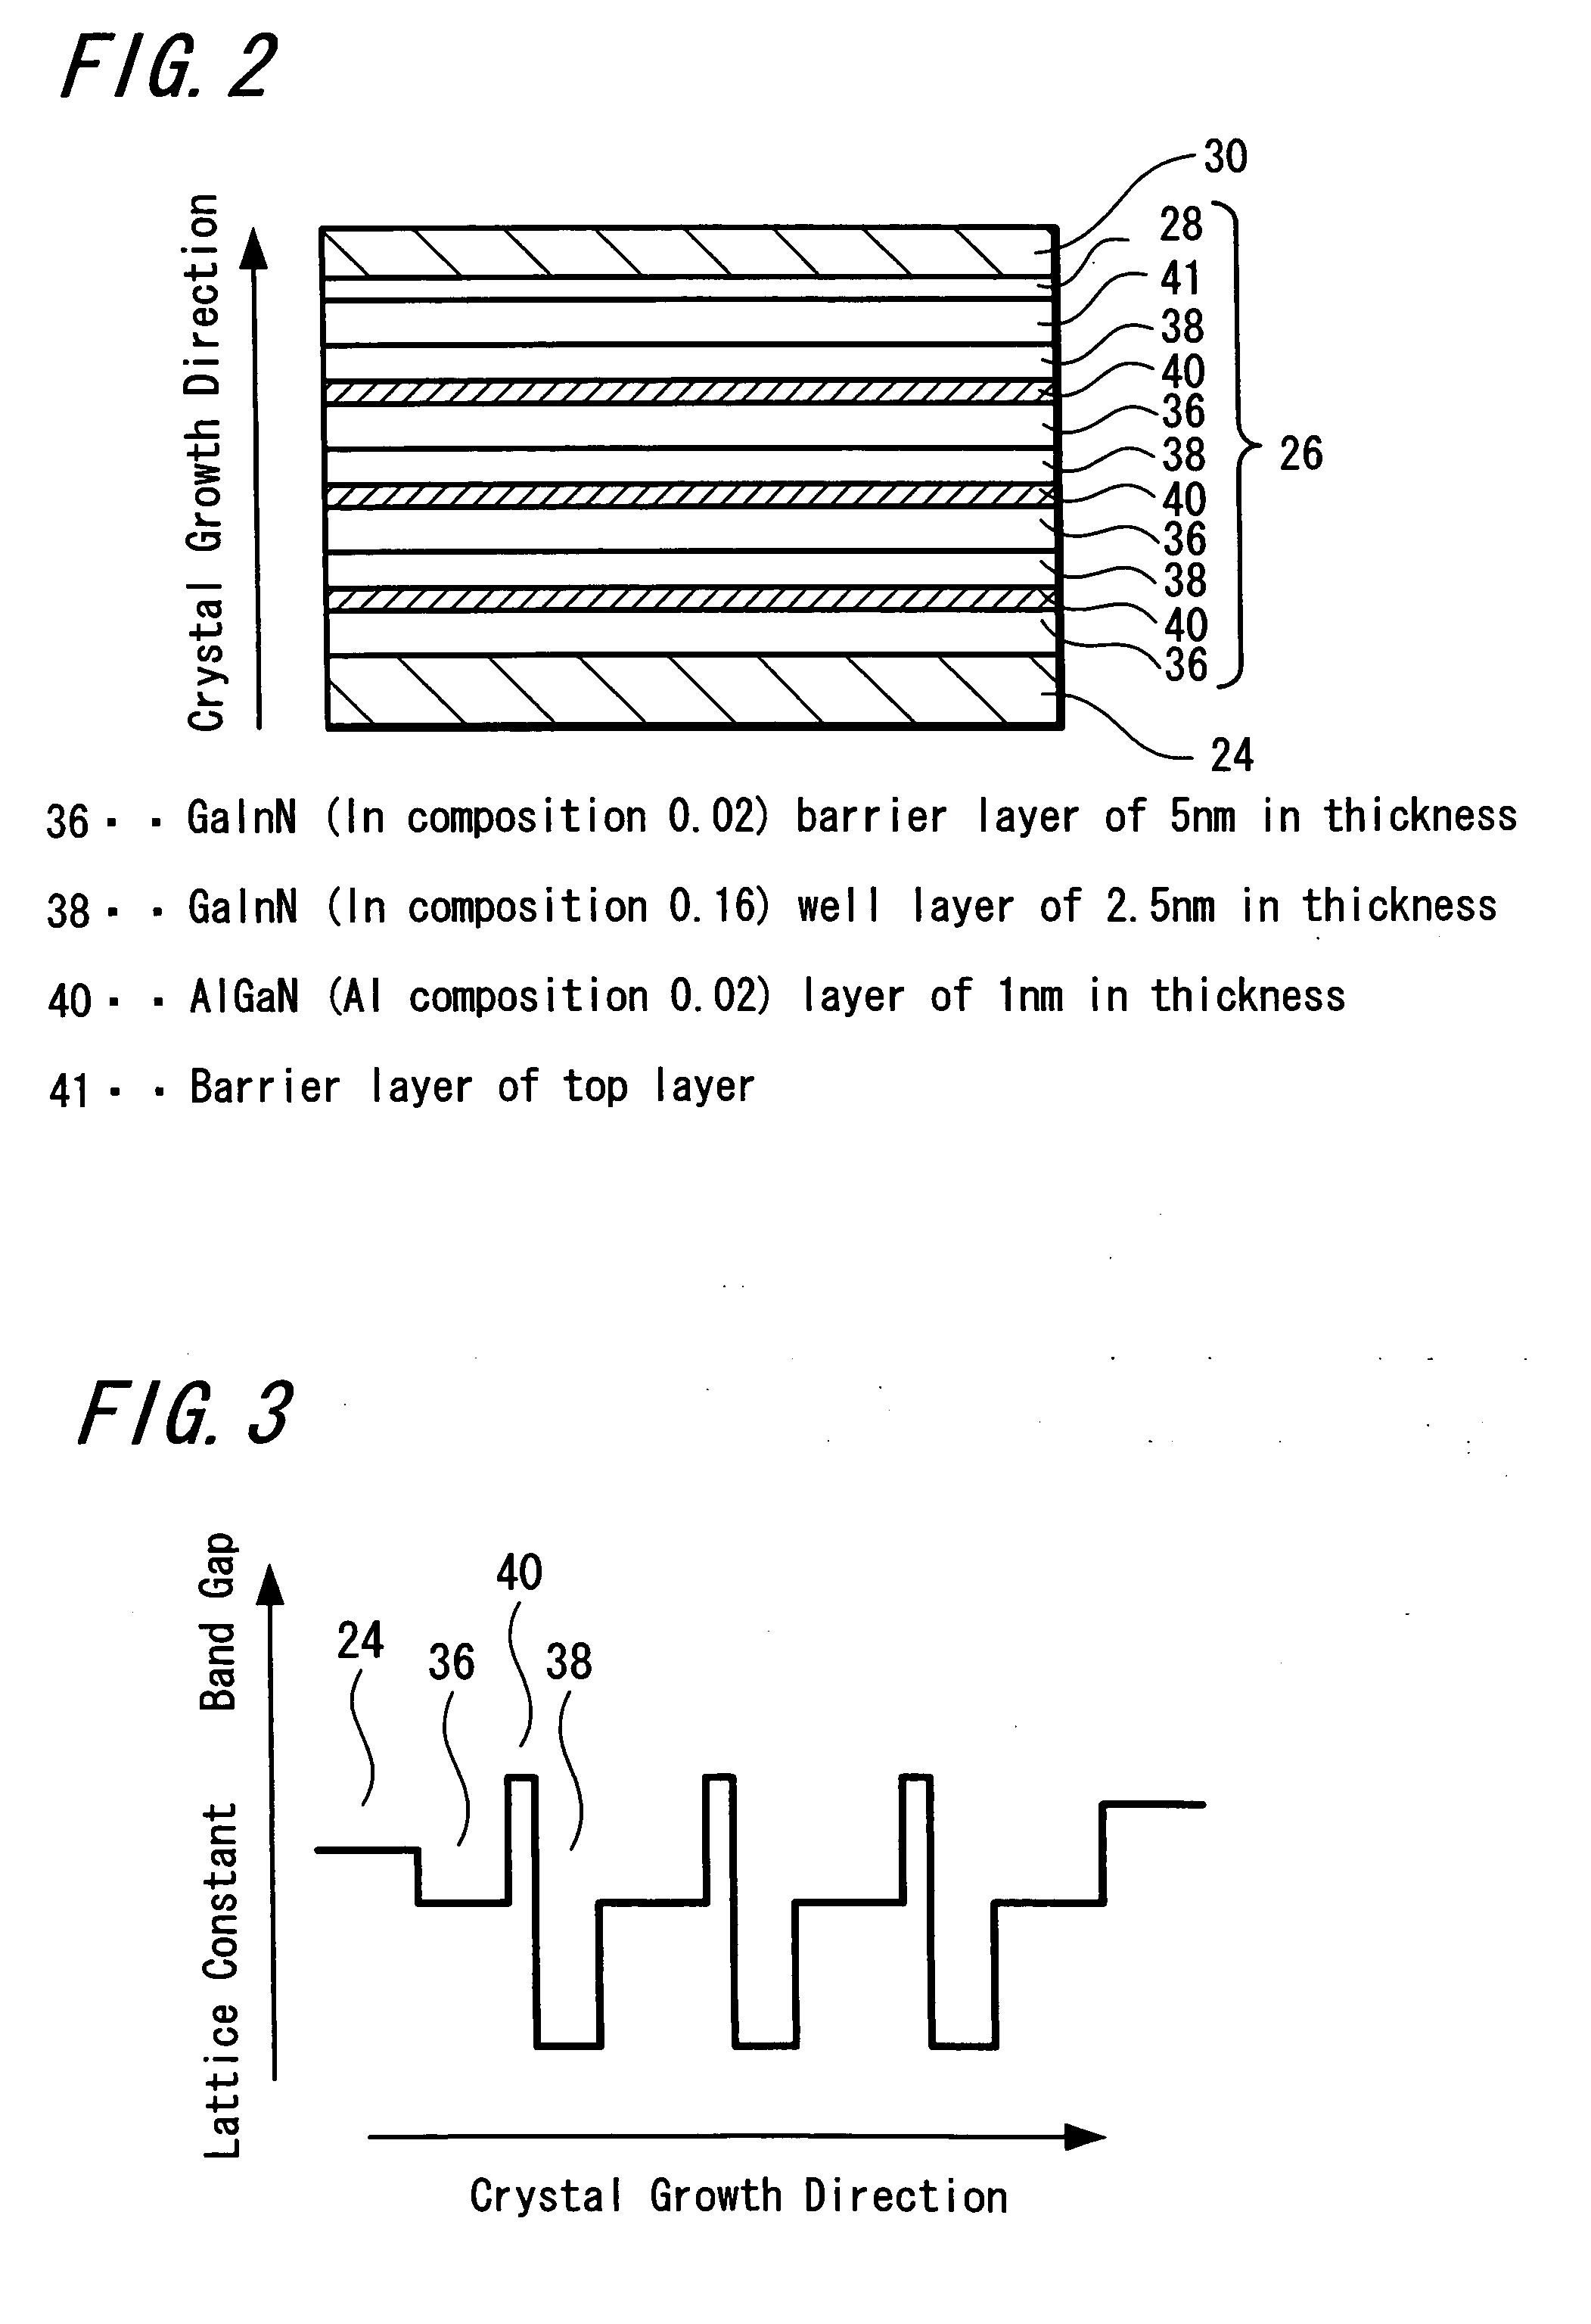 Gan-Based III-V Compound Semiconductor Light-Emitting Element and Method for Manufacturing Thereof